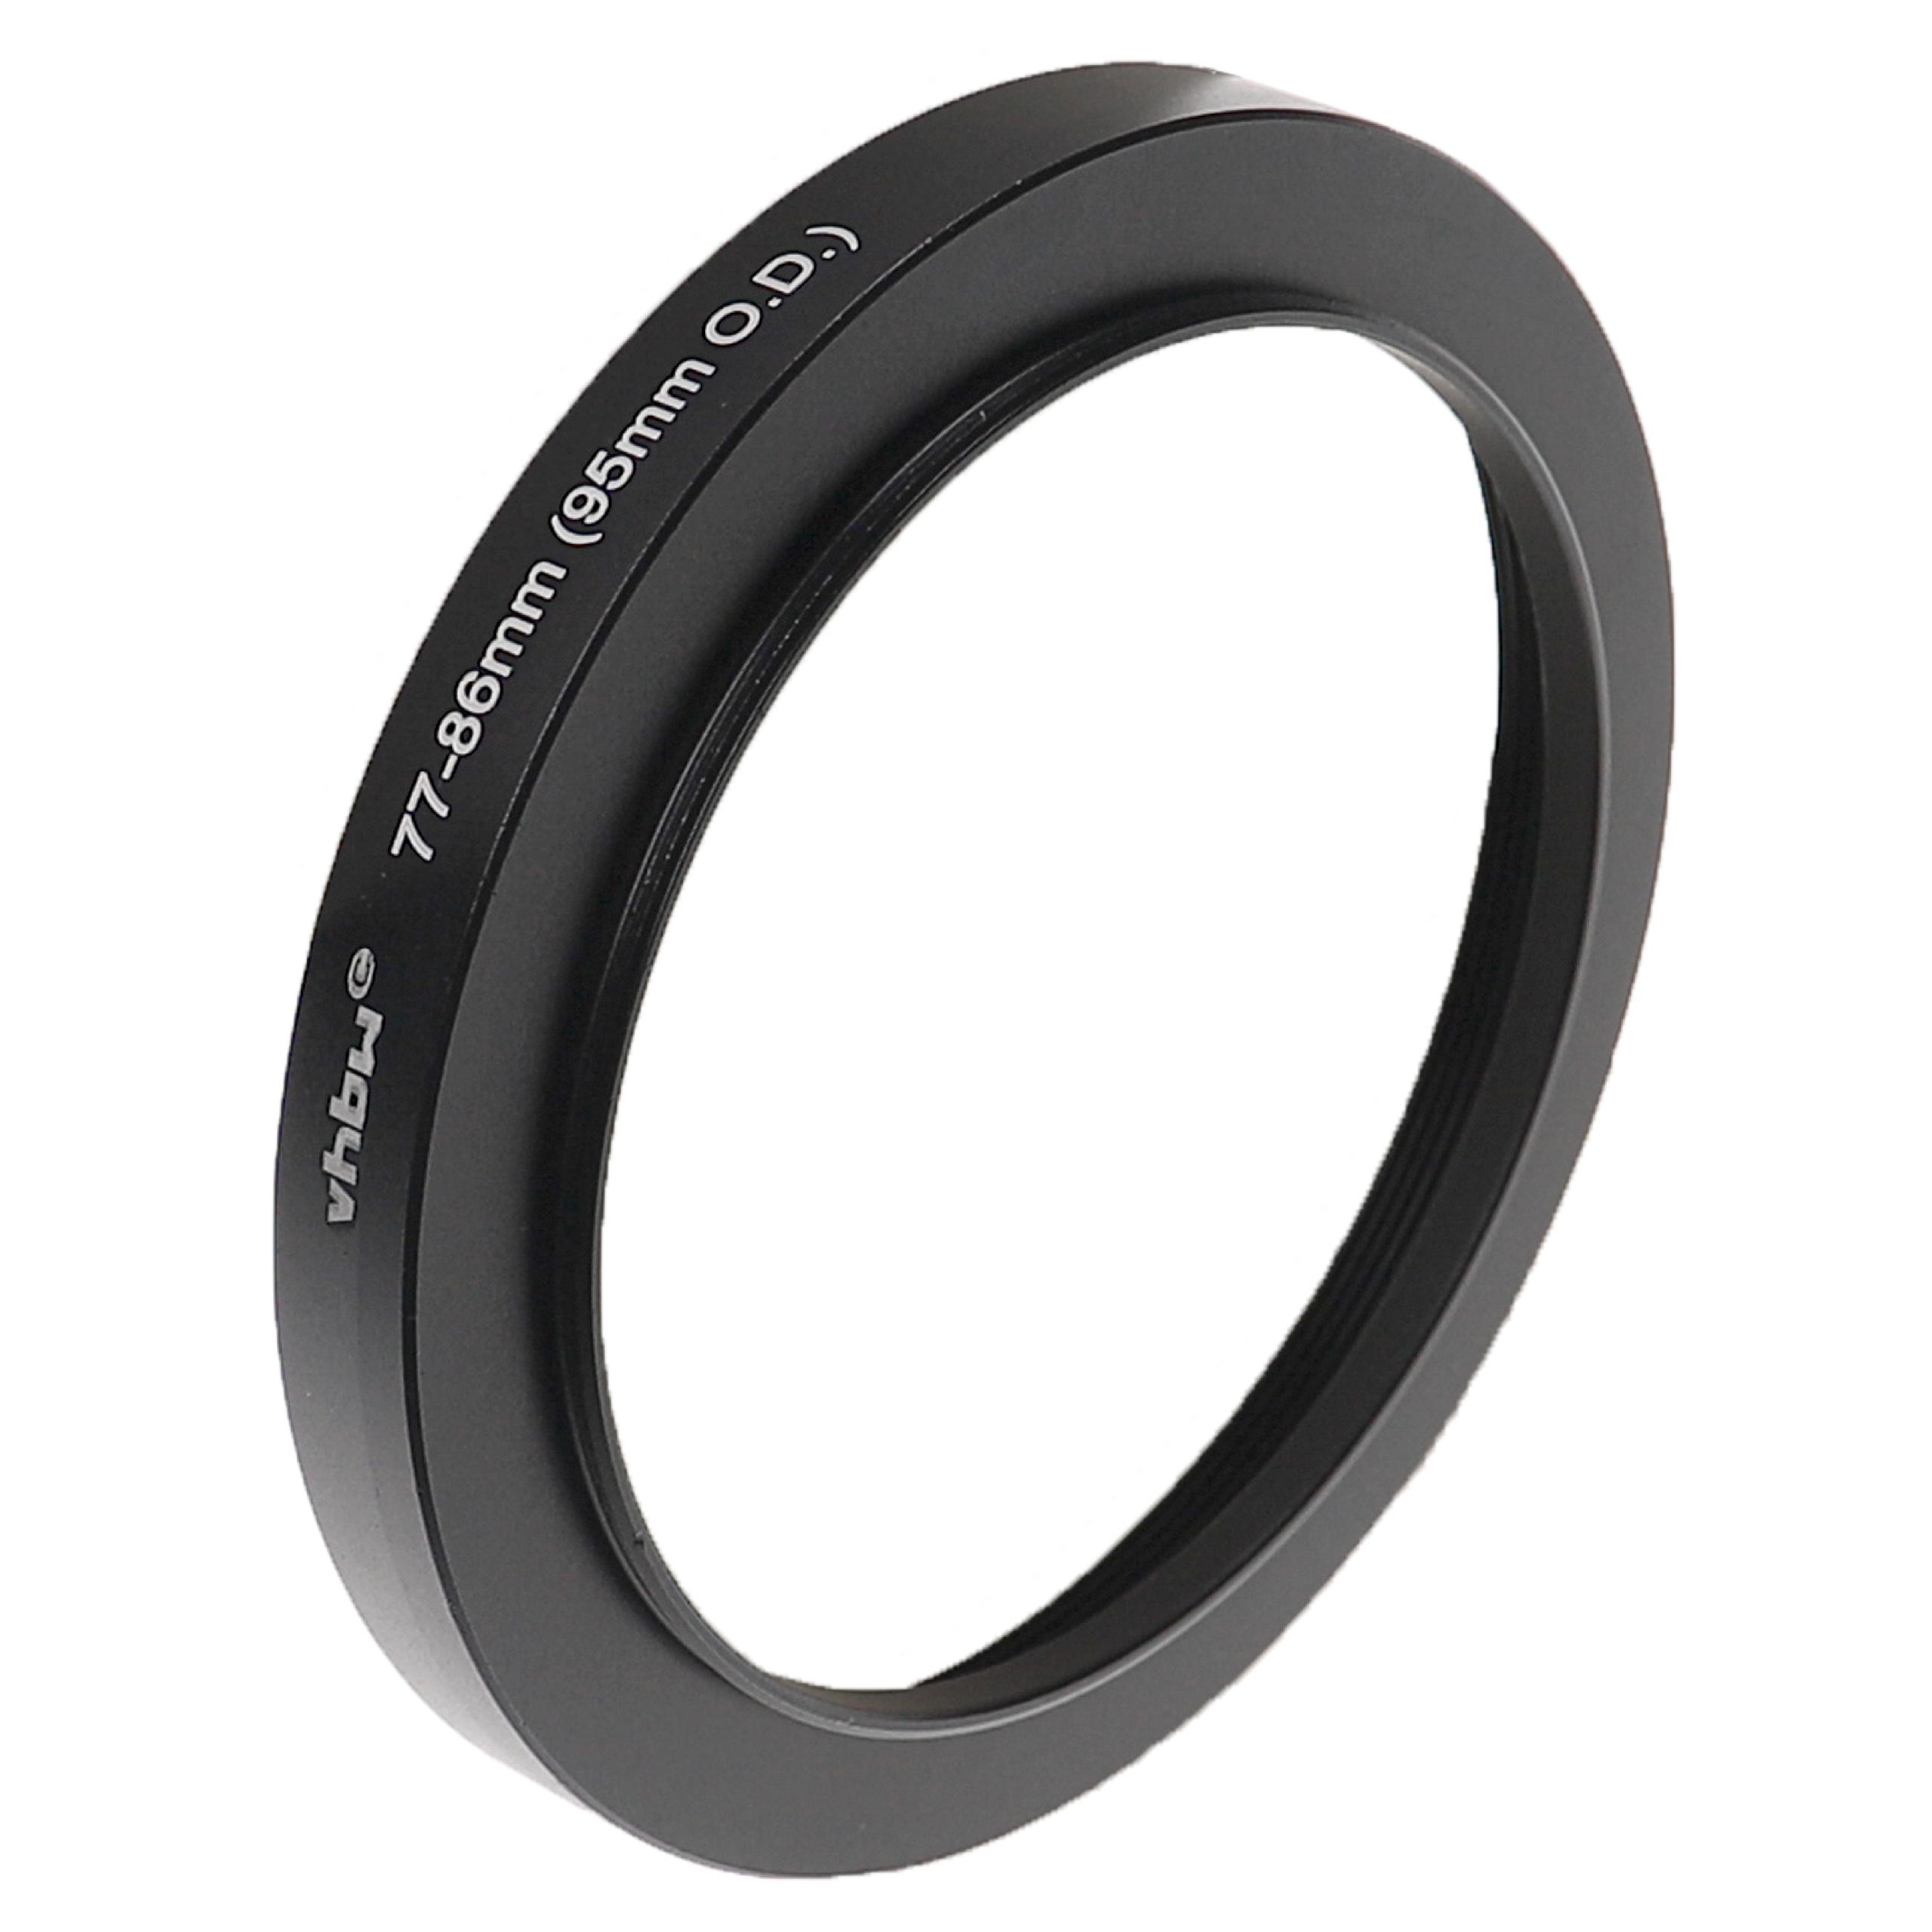 Step-Up Ring Adapter of 77 mm to 86 mm for Matte Box 95mm O.D. - Filter Adapter